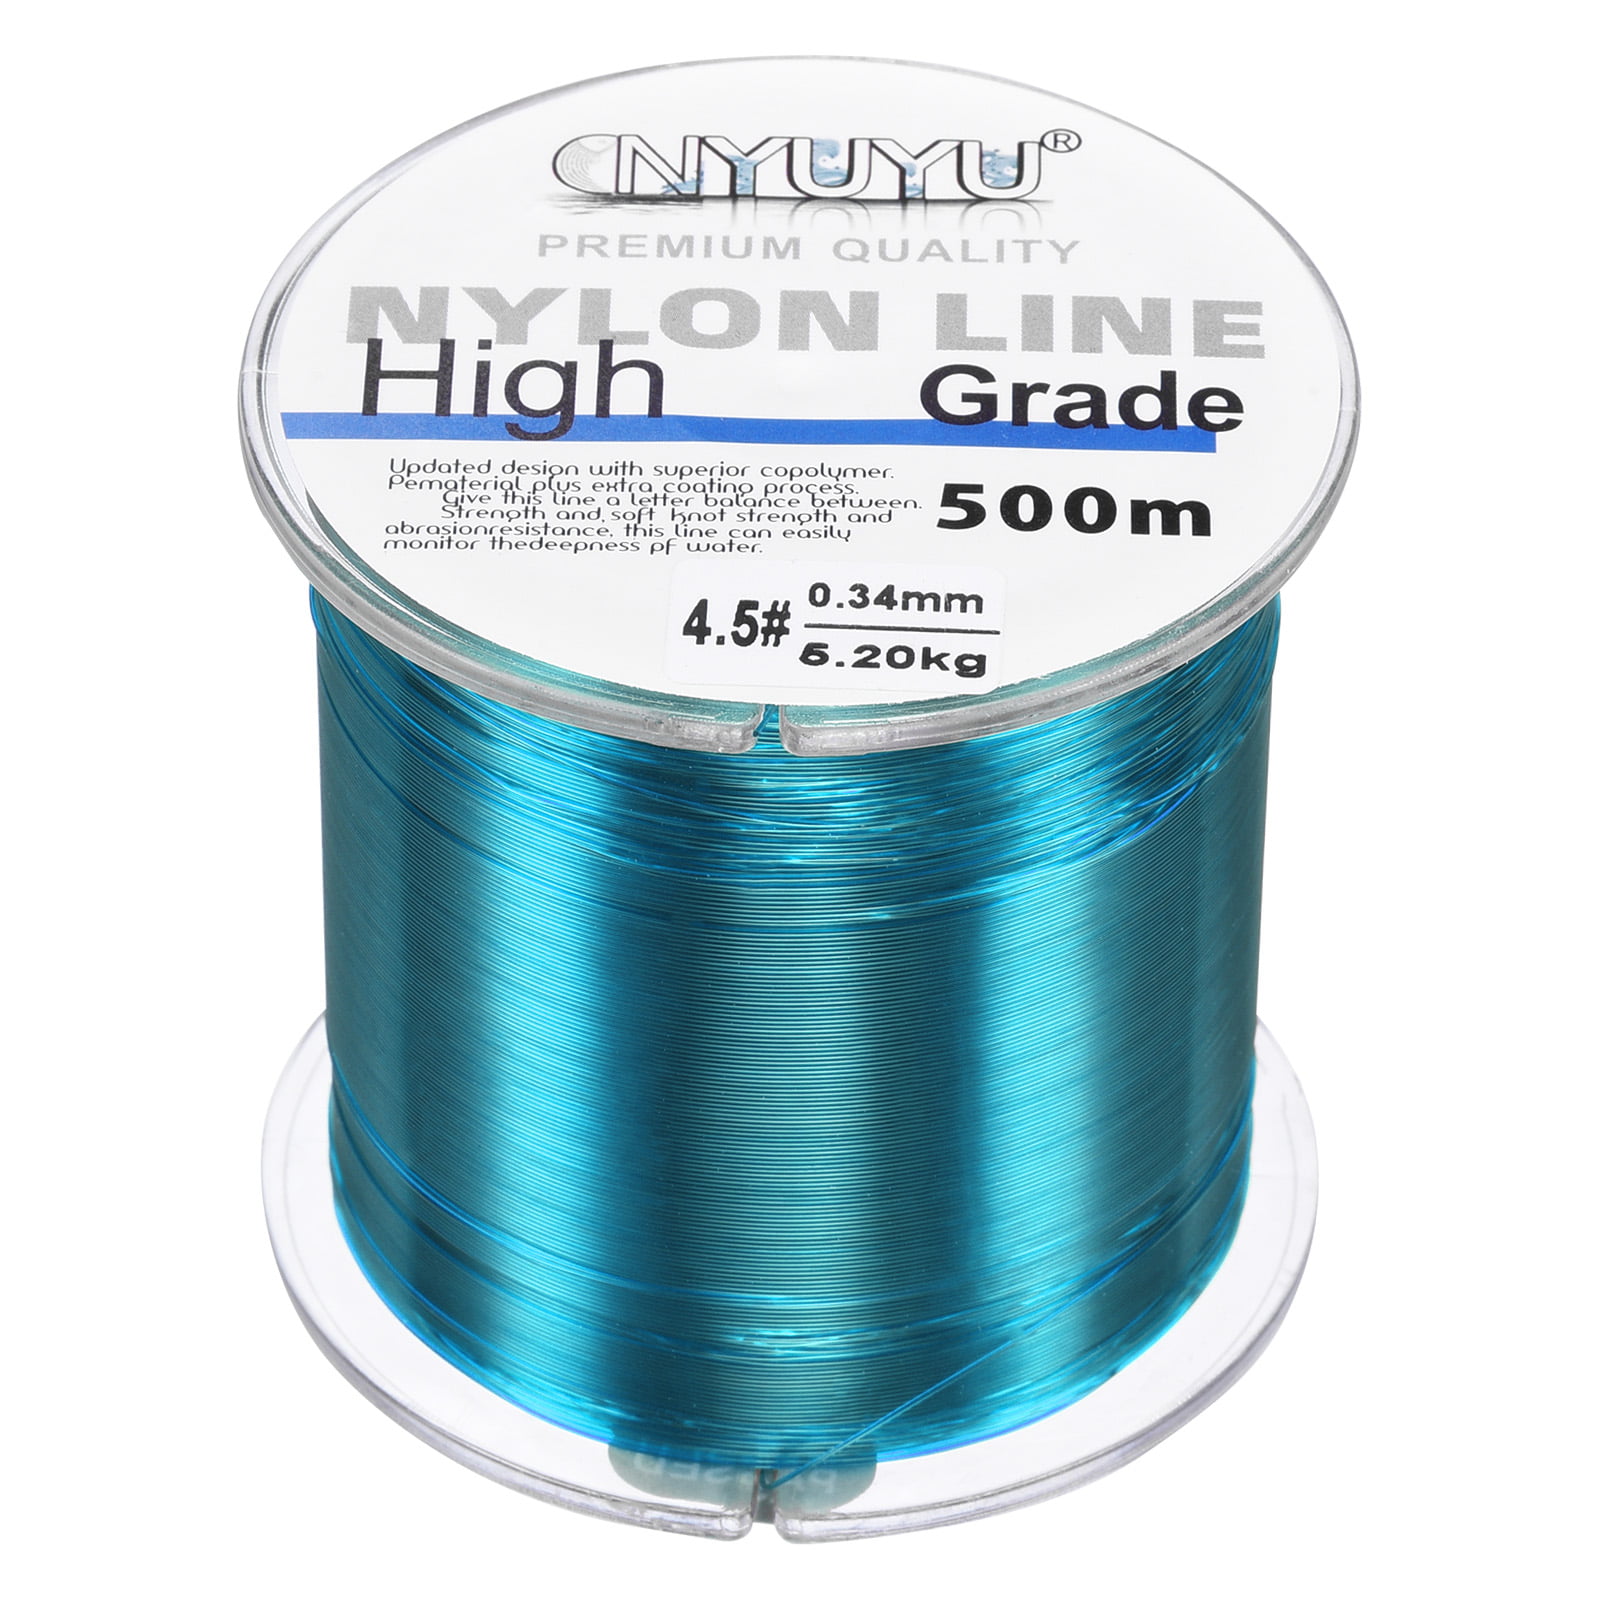 Uxcell 547Yard 12Lb Fluorocarbon Coated Monofilament Nylon Fishing Line Sky  Blue